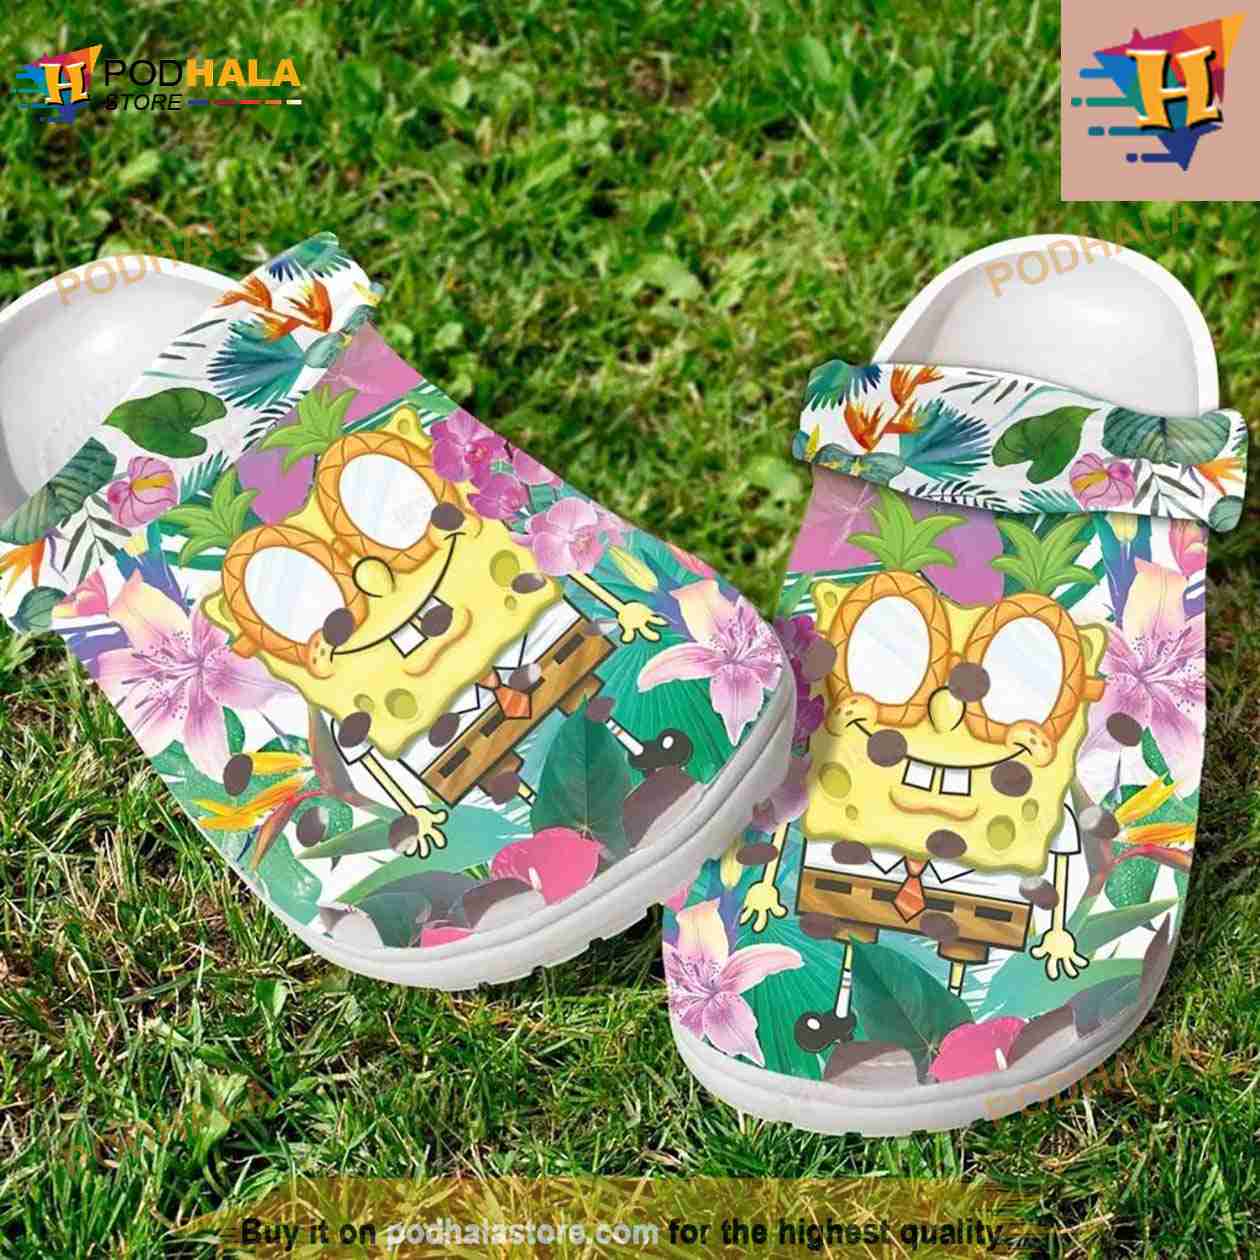 Spongebob Classic Crocs Clog Bring Your Ideas, Thoughts And Imaginations Into Today